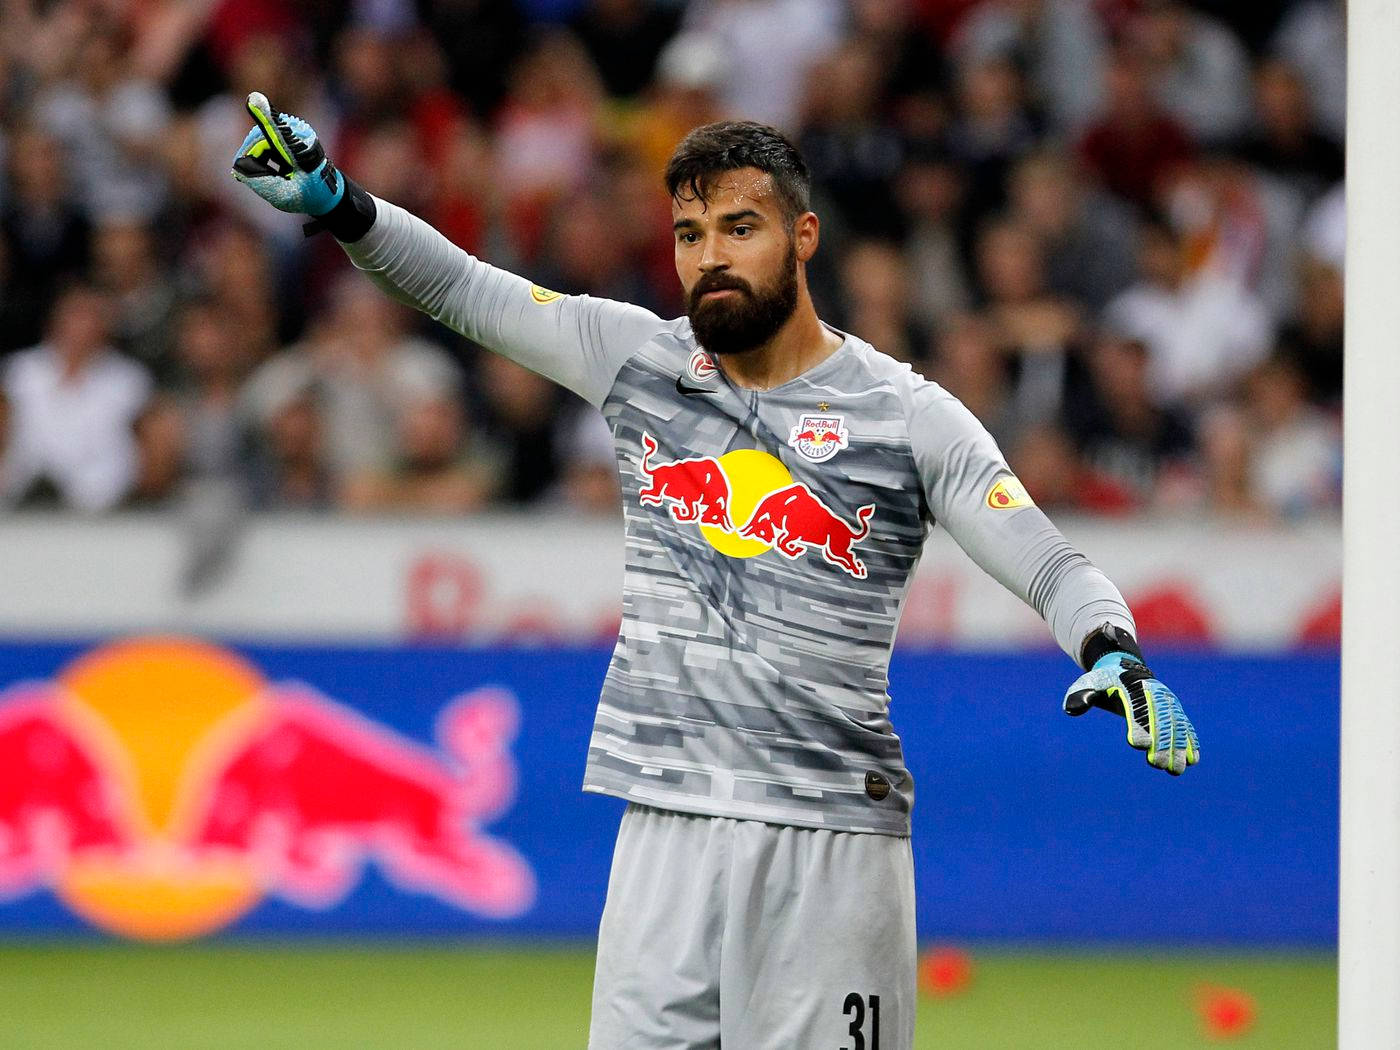 Carlos Coronel, the Dynamic Goalkeeper of the New York Red Bulls Wallpaper